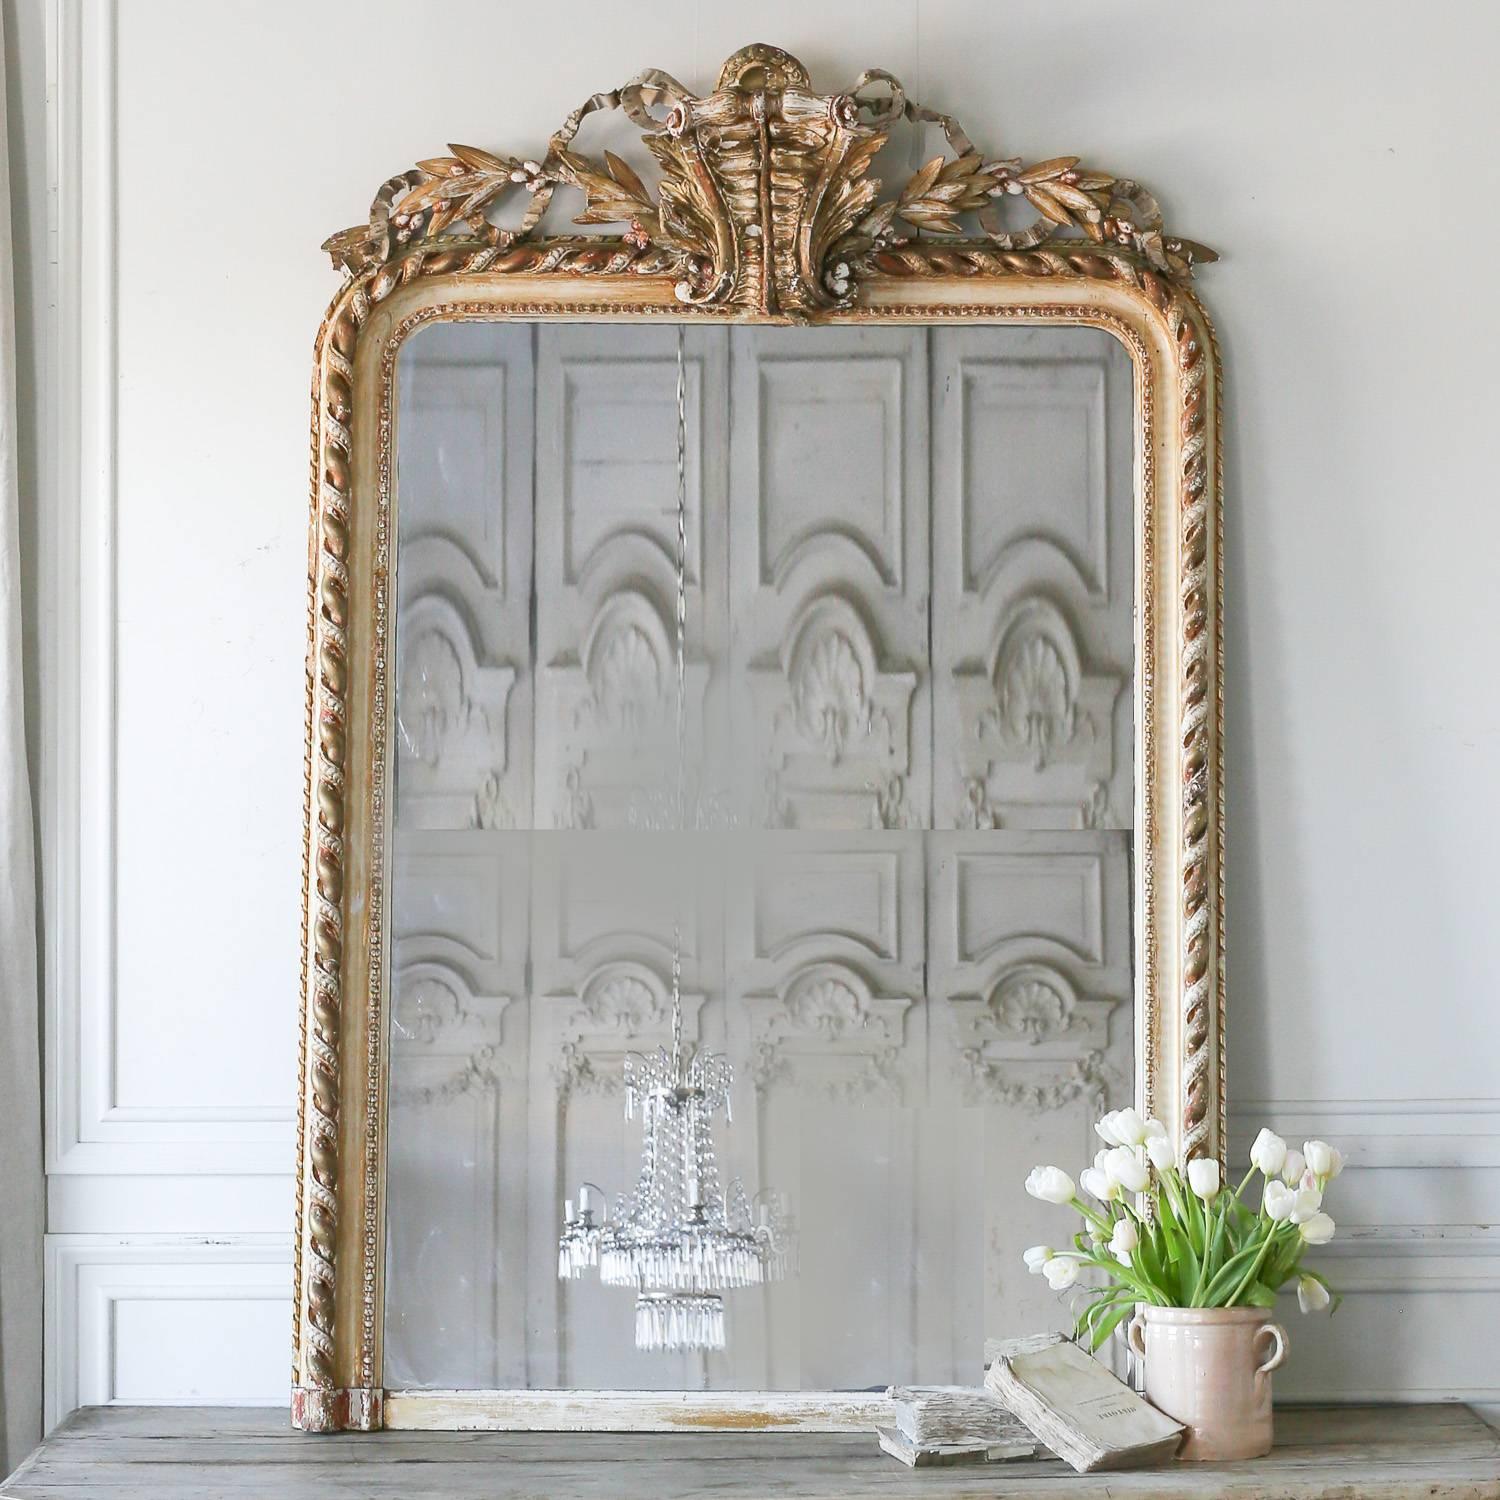 Stunning antique mirror in light gilt and distressed white finish. Some scratches on the glass showcasing the age of this beauty. Thick twisting ropes decorate the frame and an elaborate cresting fern-like frond sits prominently atop and center